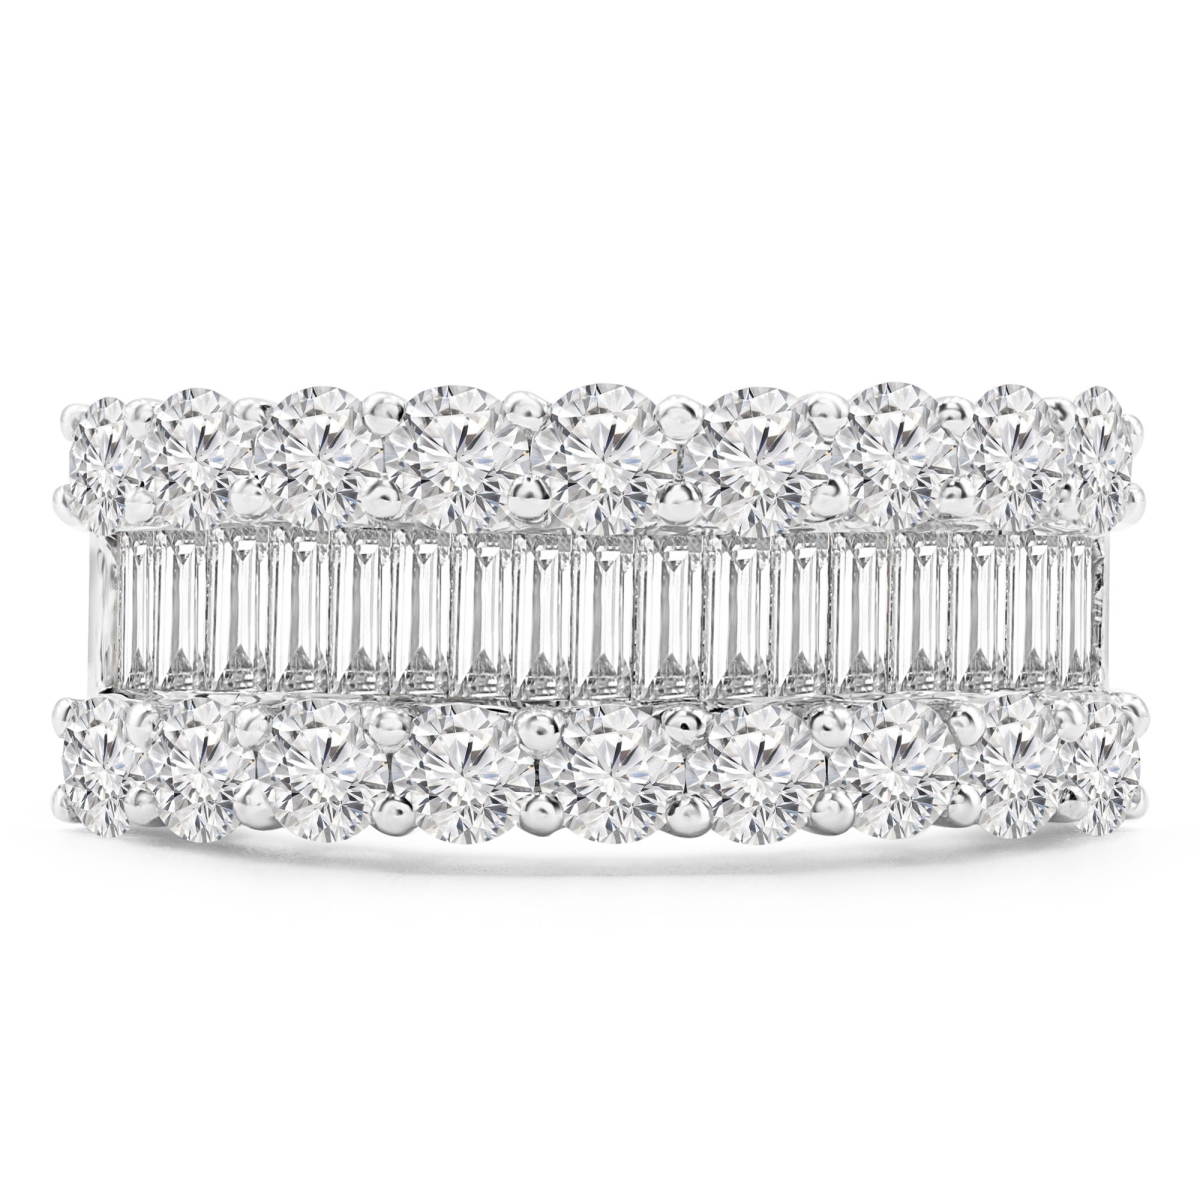 Picture of Majesty Diamonds MD210001-3.5 2.1 CTW Baguette Diamond Three-Row Cocktail Ring in 18K White Gold - Size 3.5